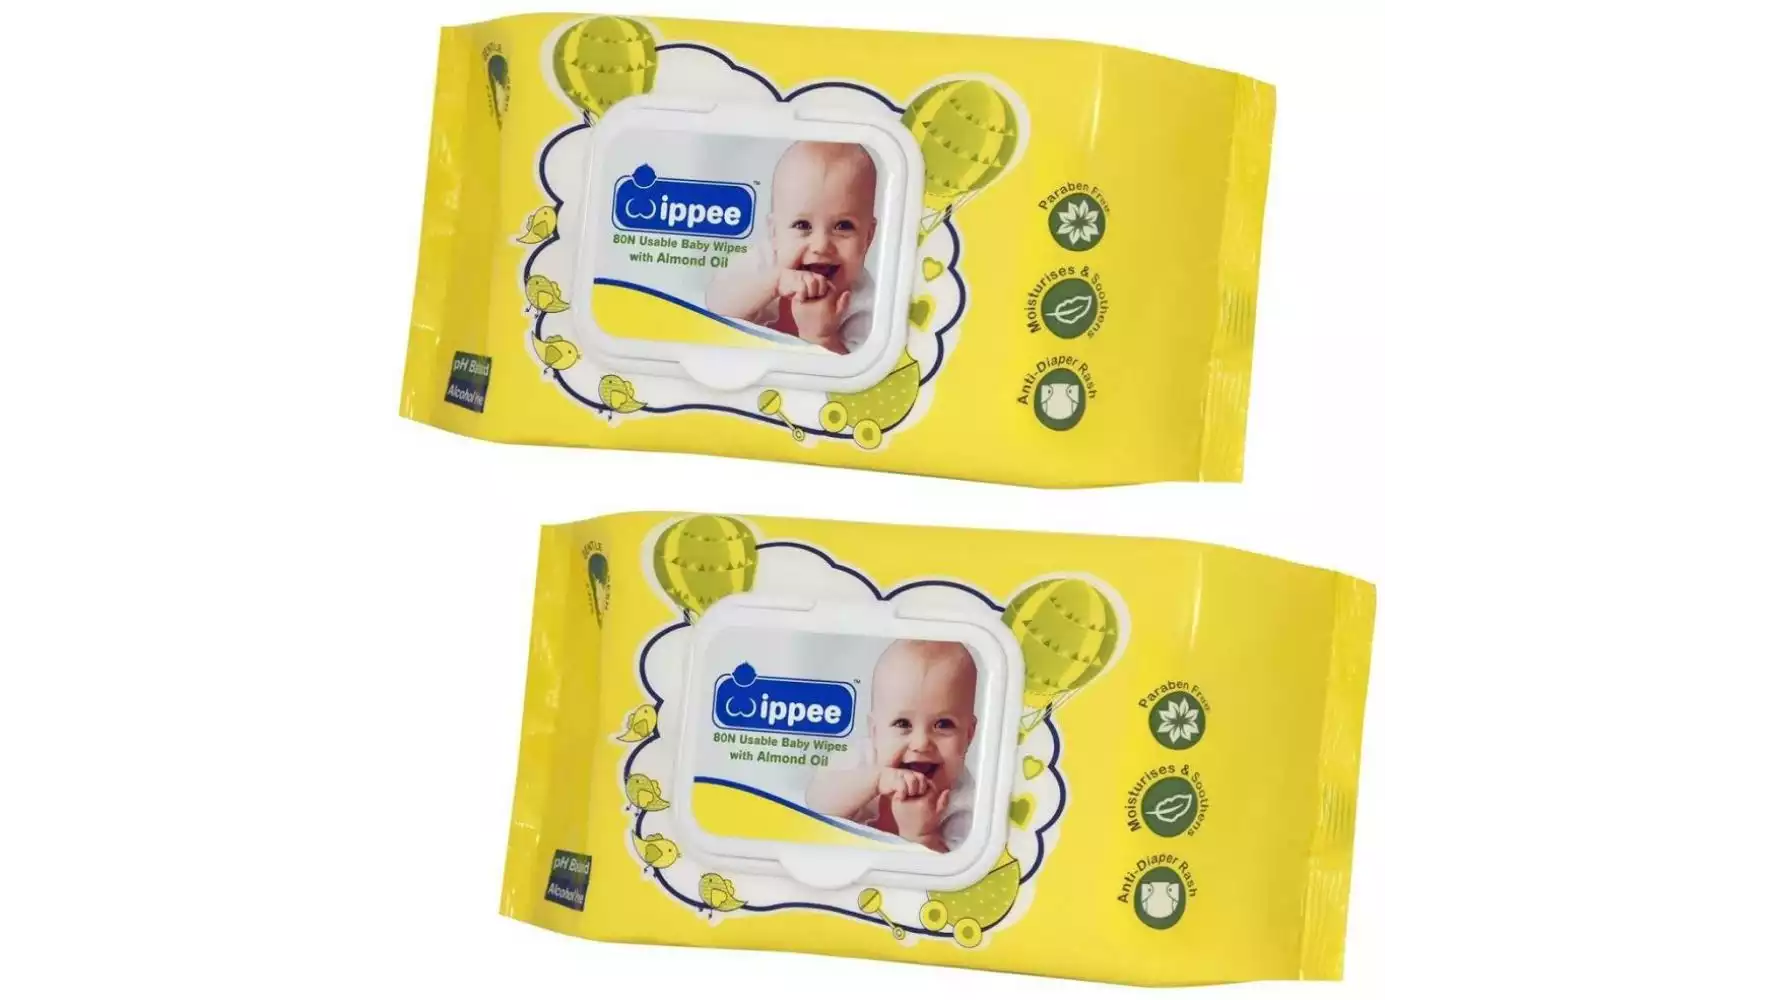 Wippee Baby Wipes (80pcs, Pack of 2)